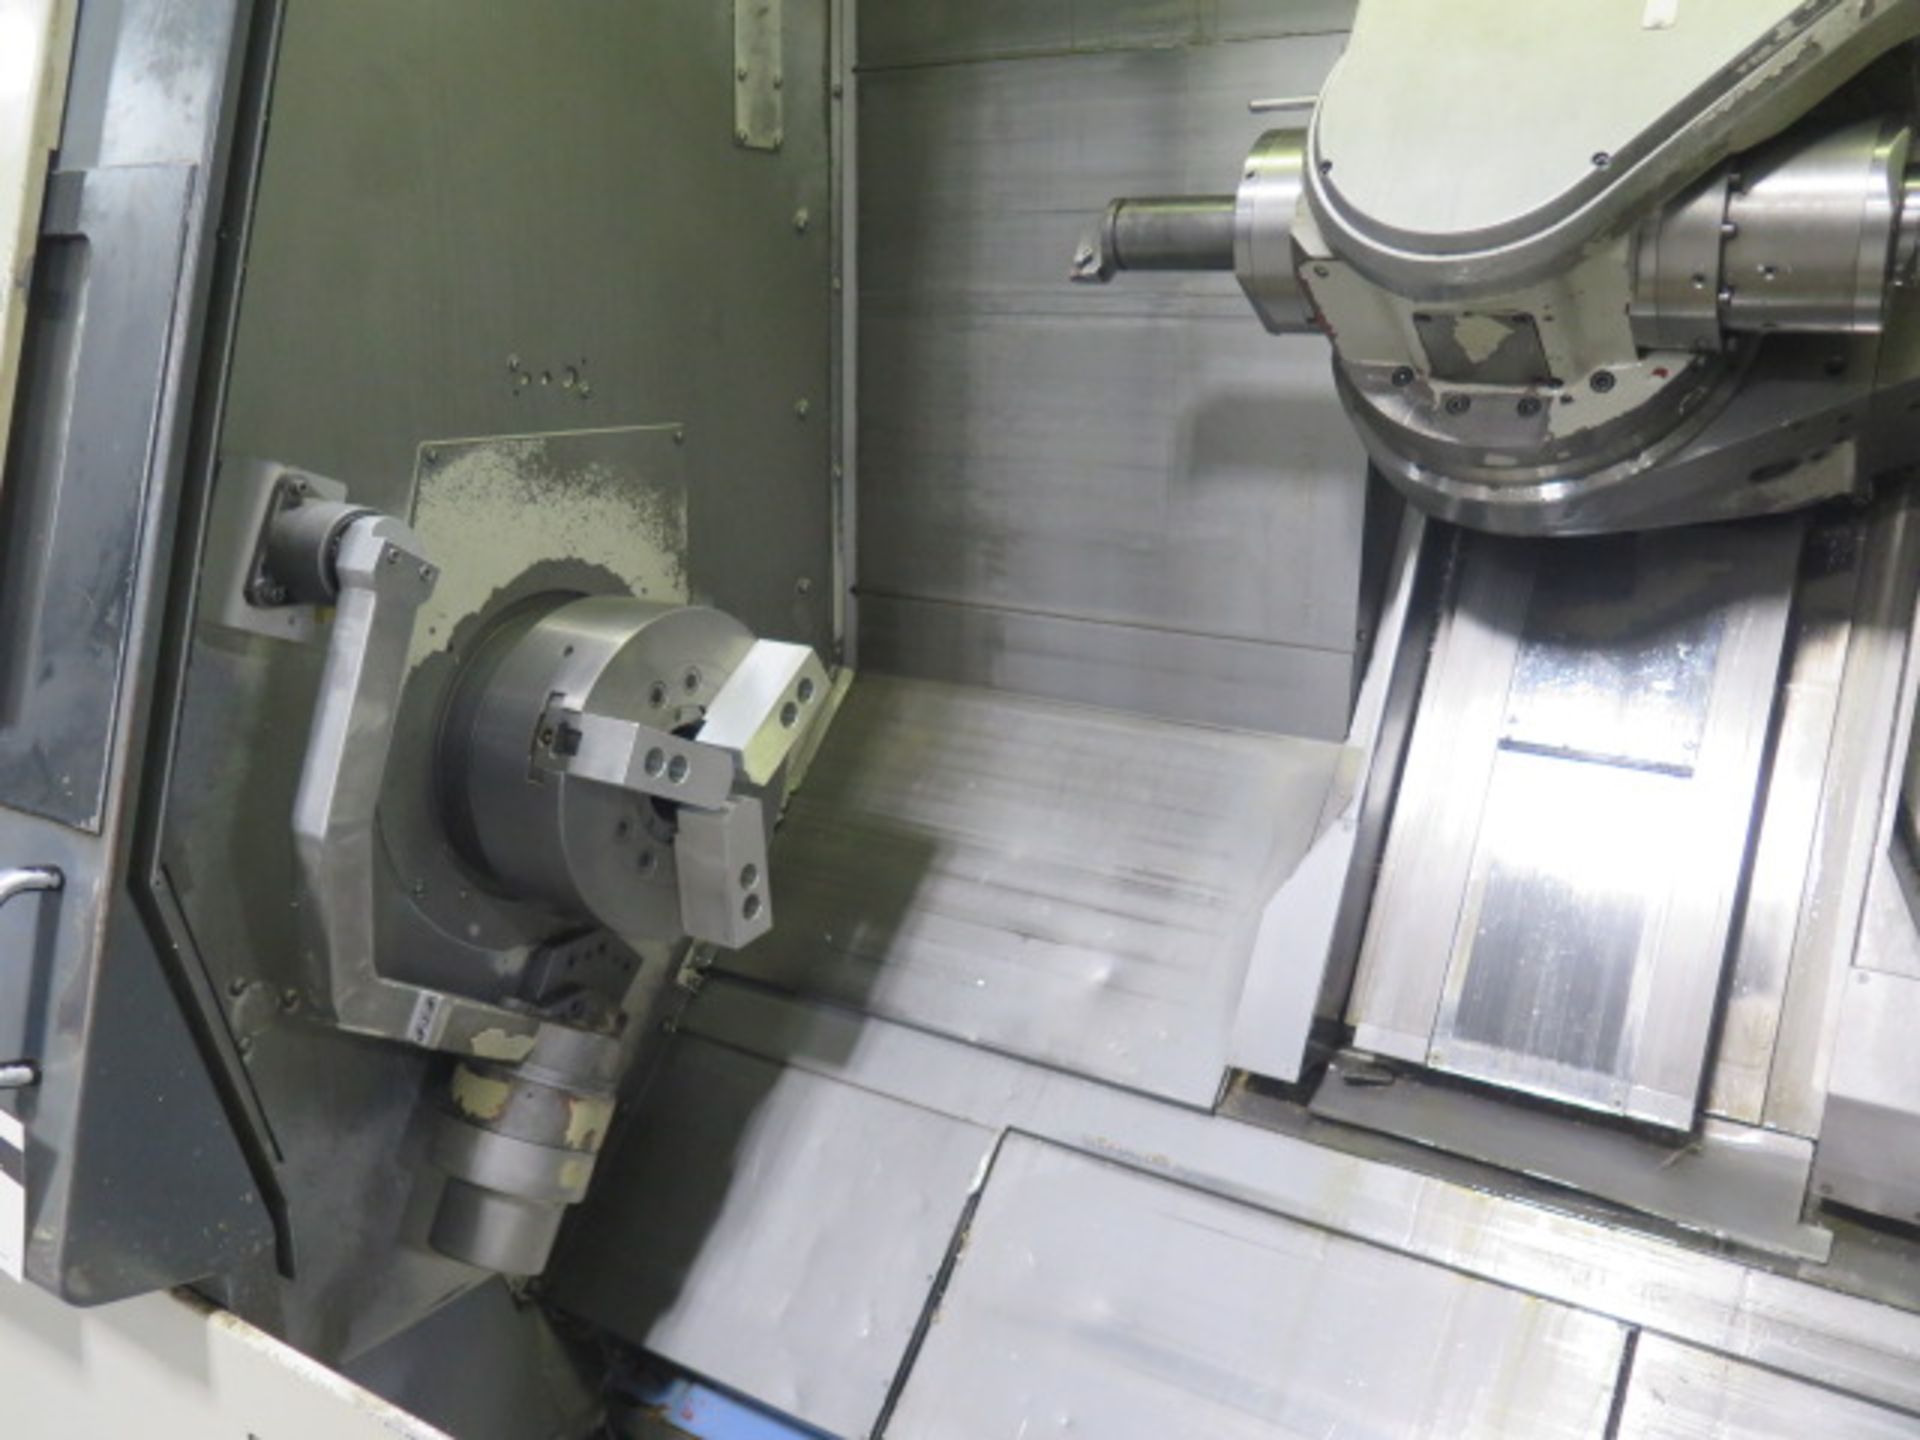 2000 Mazak Integrex 300SY Twin Spindle, Multi-Axis CNC Turning/Milling Center s/n 151650 w/ Mazatro - Image 8 of 18